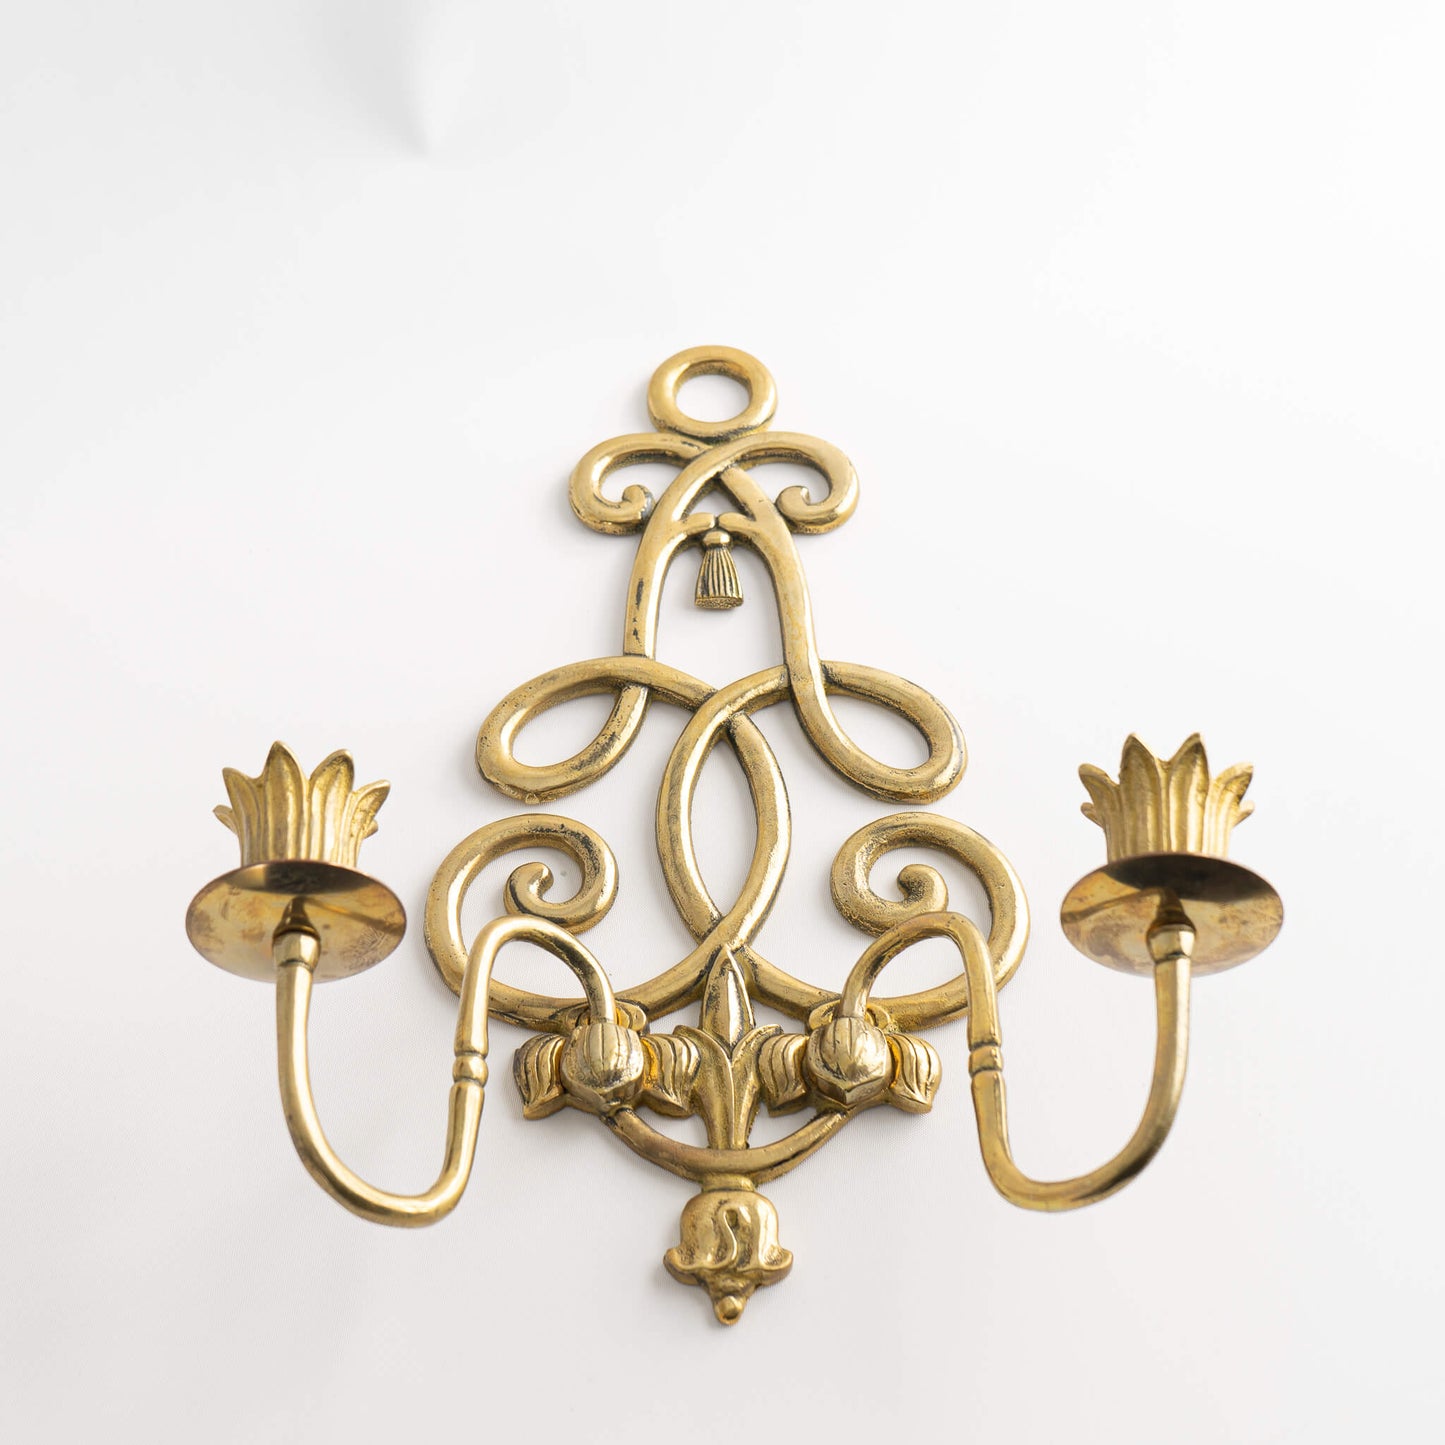 Vintage Brass Candle Holder Wall Sconce - A Pair – The Vintage Advisor